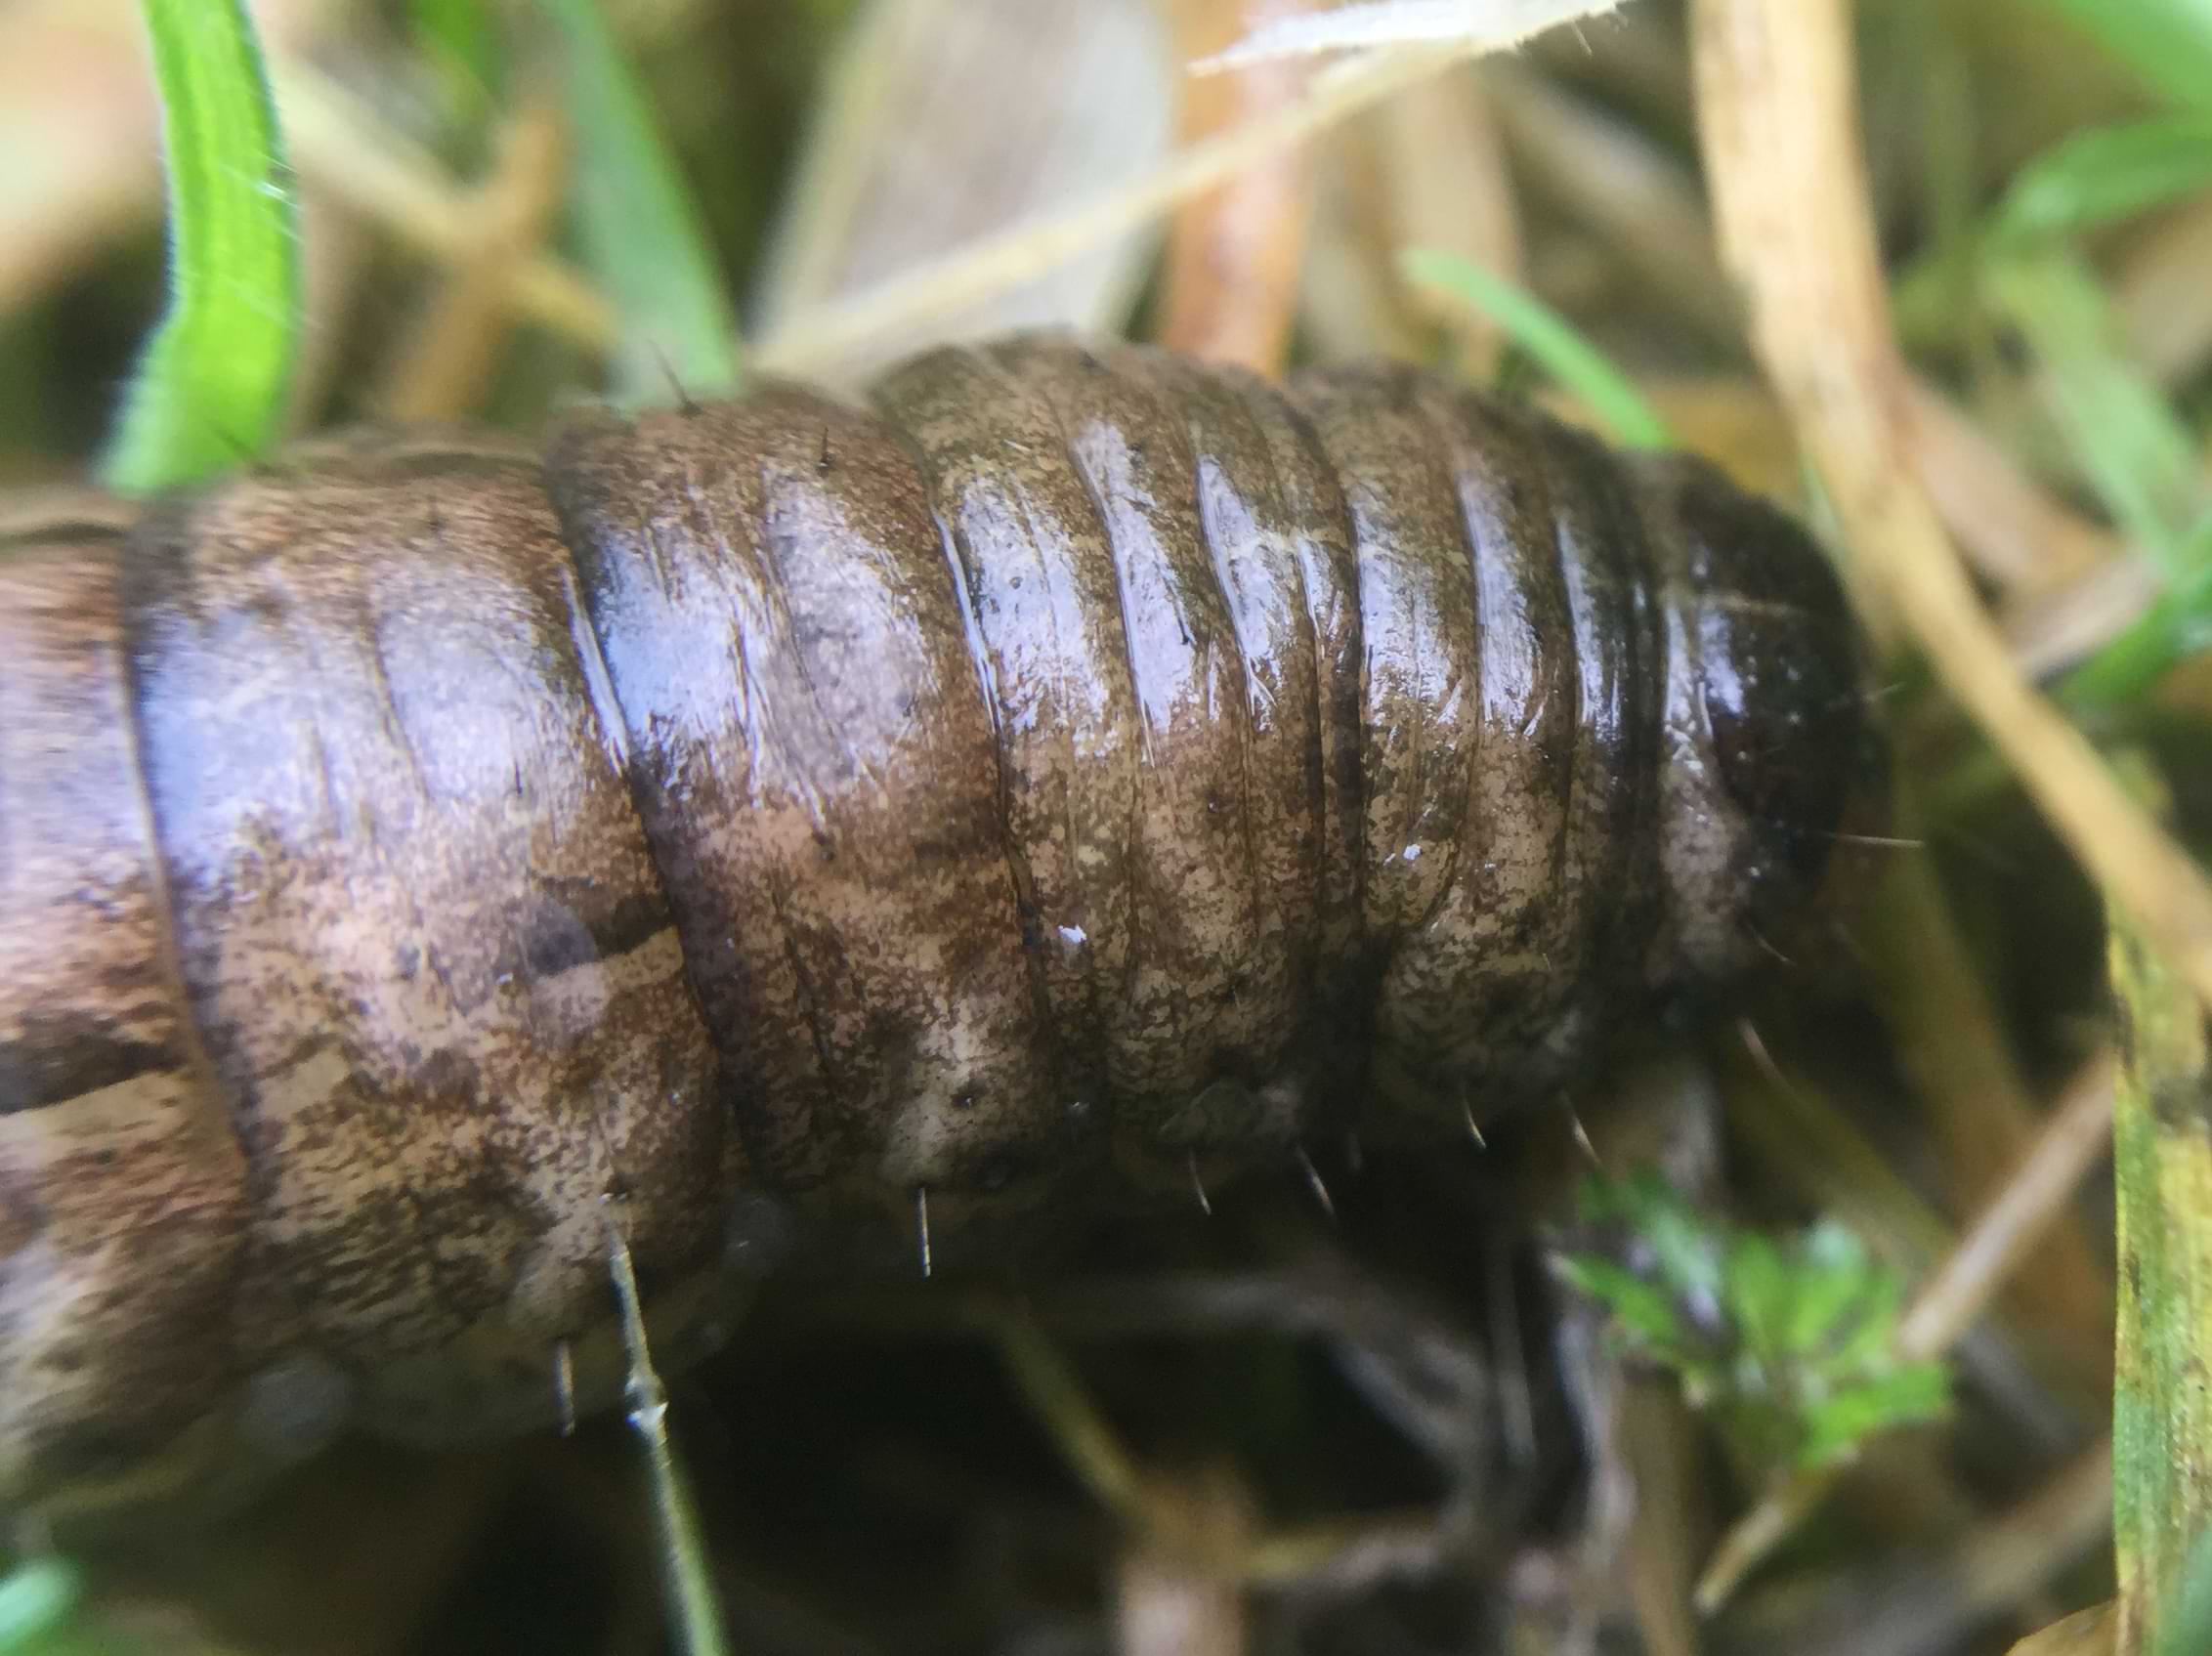 Close up of the previous catterpillar. Its skin is shiny and wrinkly.